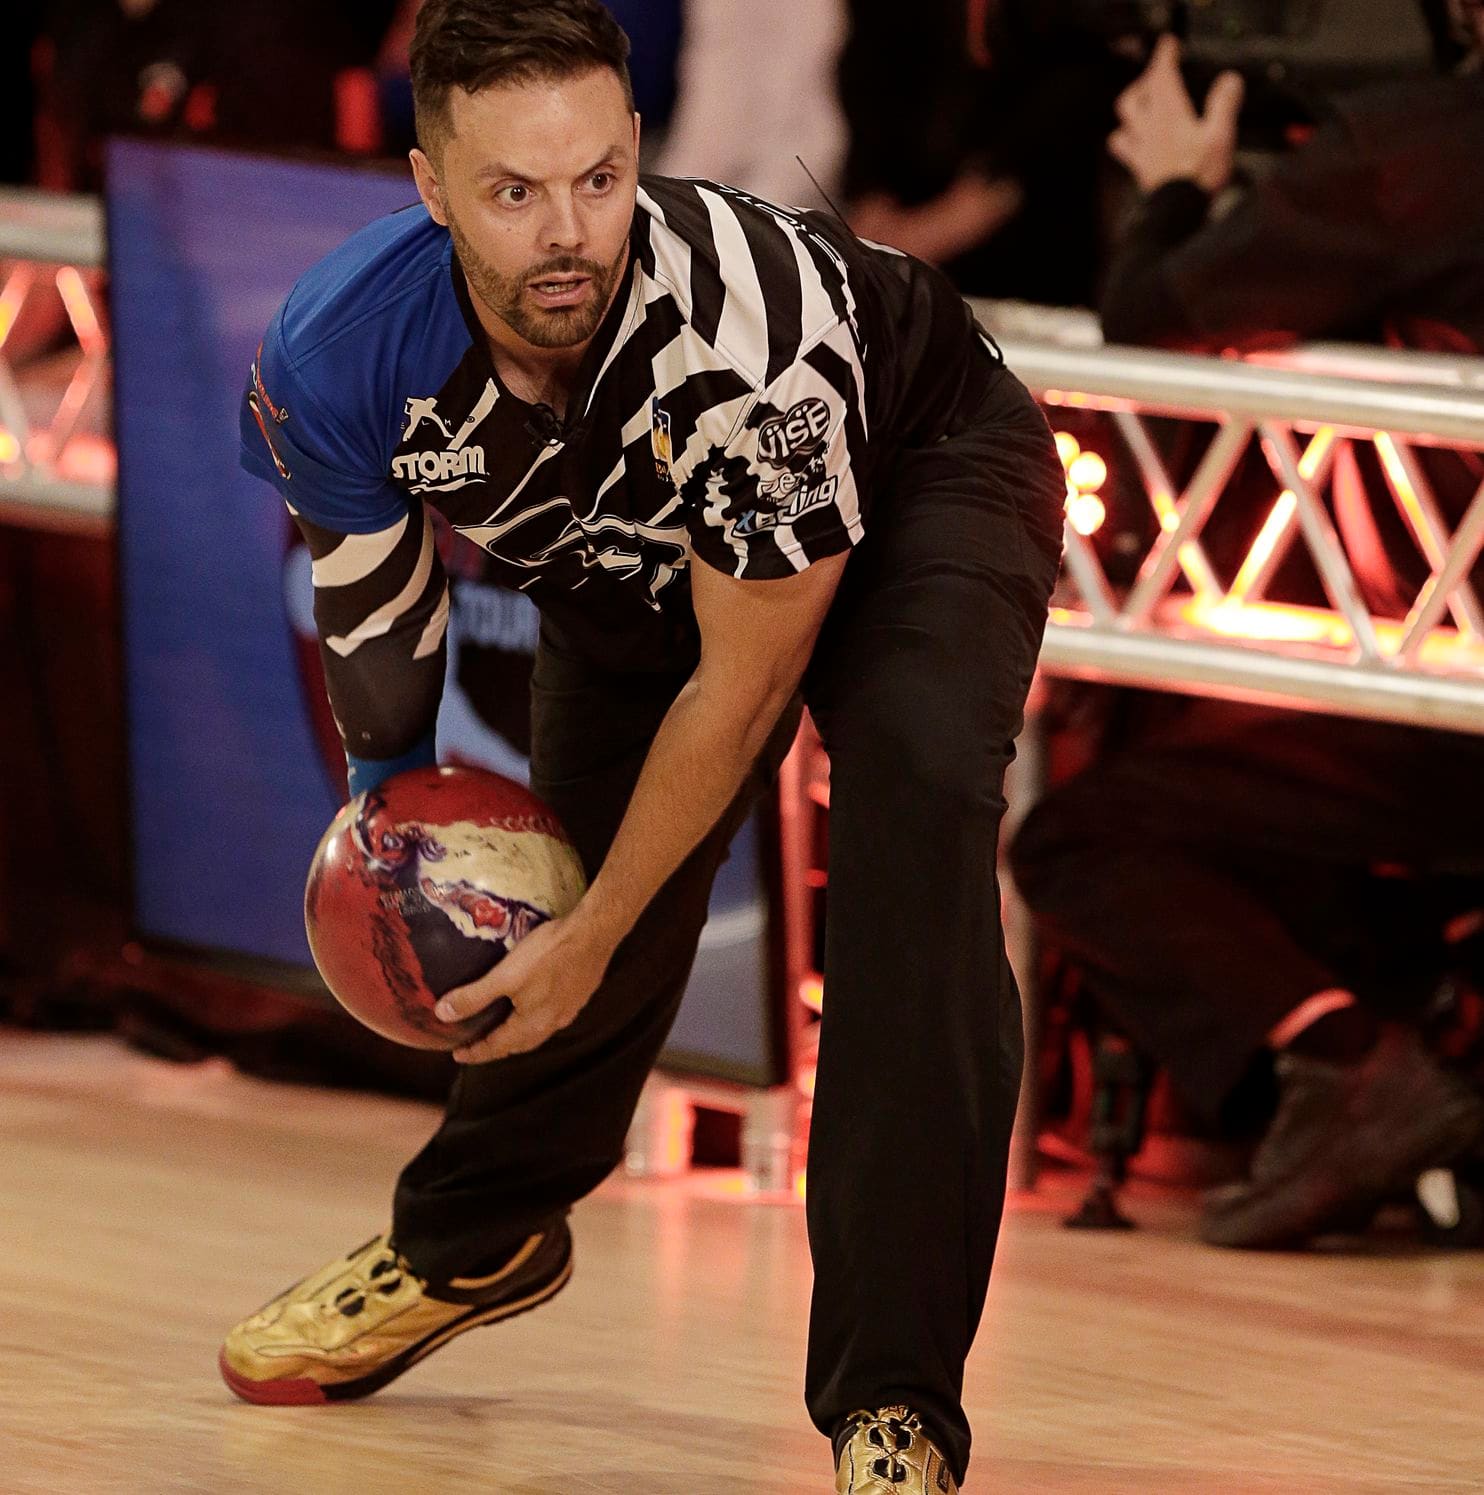 America, embrace Jason Belmonte. With two hands.